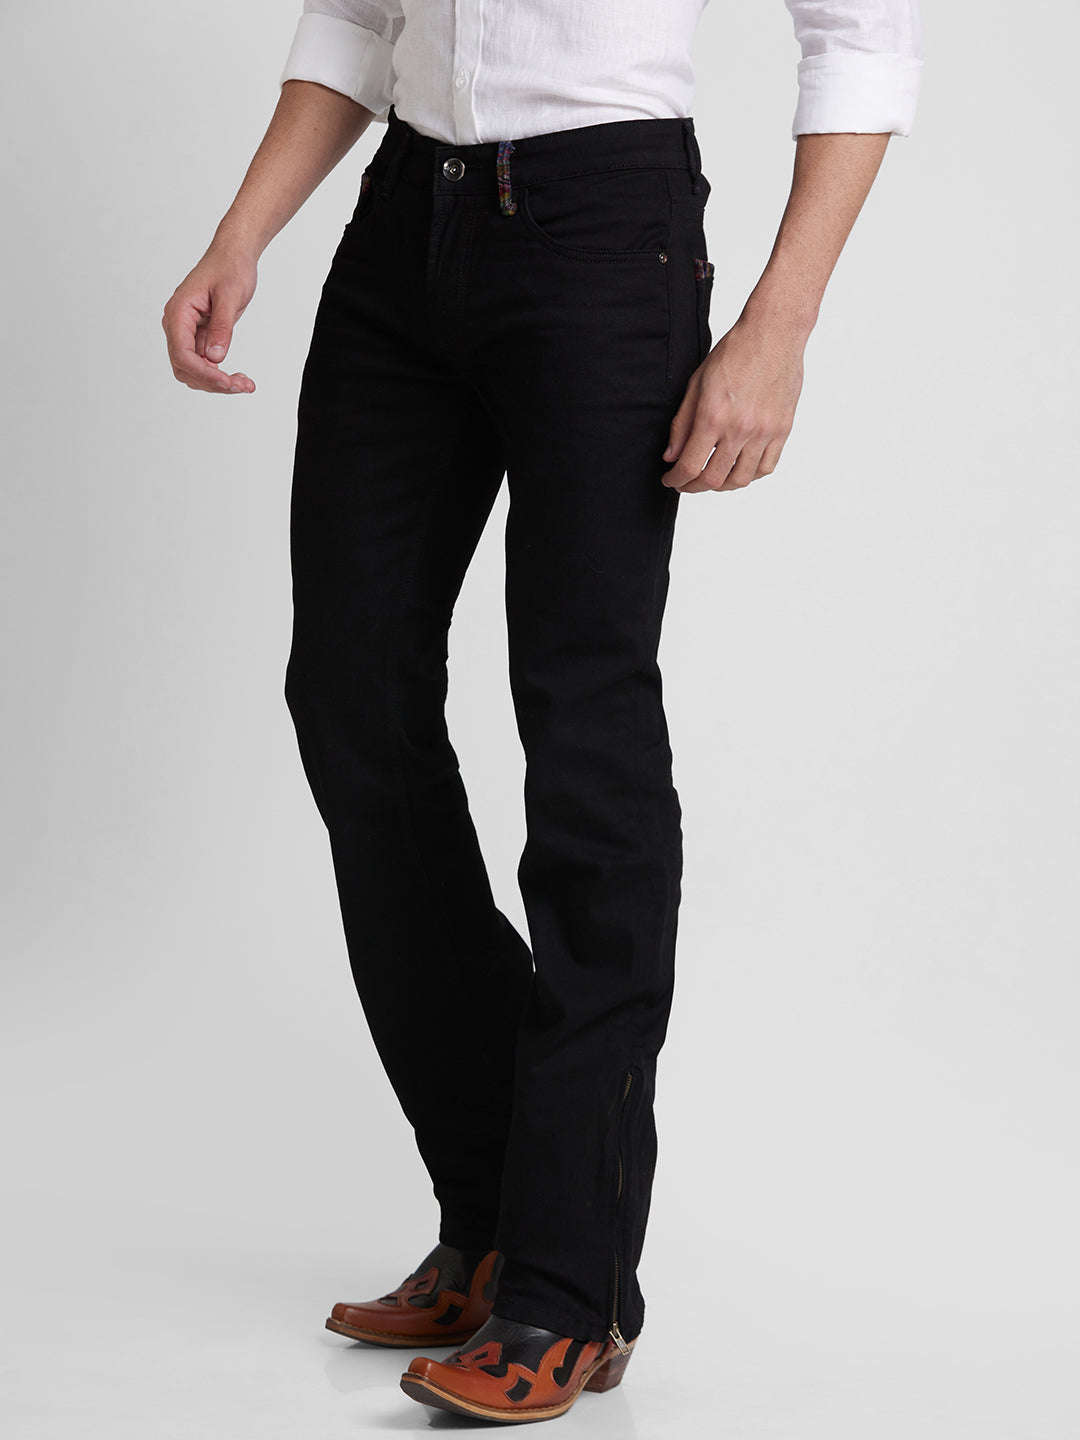 Black Bootcut Jeans with Zipper Bottom